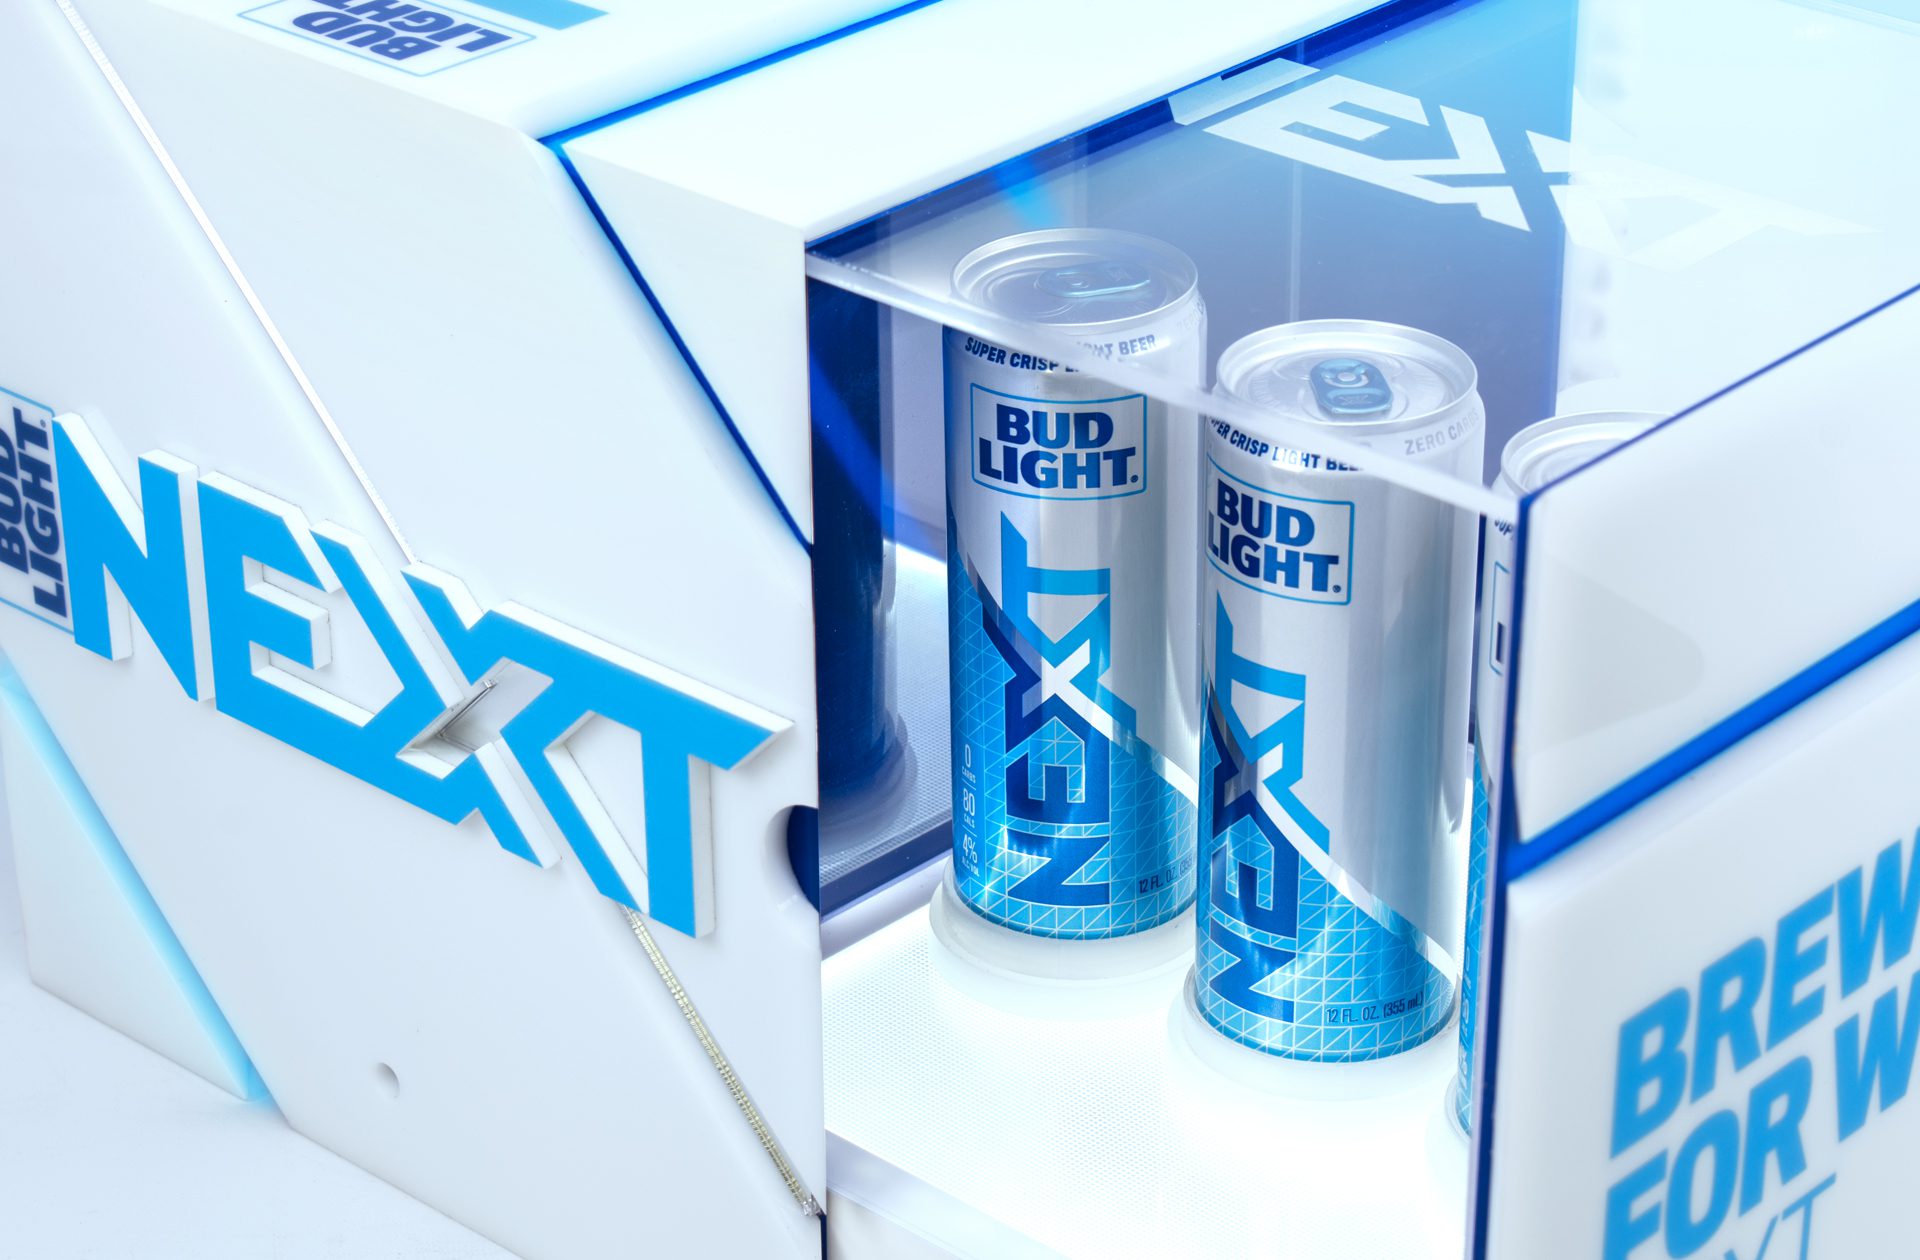 Close-up shot of a brand activation kit & influencer unboxing experience promoting the launch of BUD LIGHT NEXT, opening up to reveal three cans of bud light next.